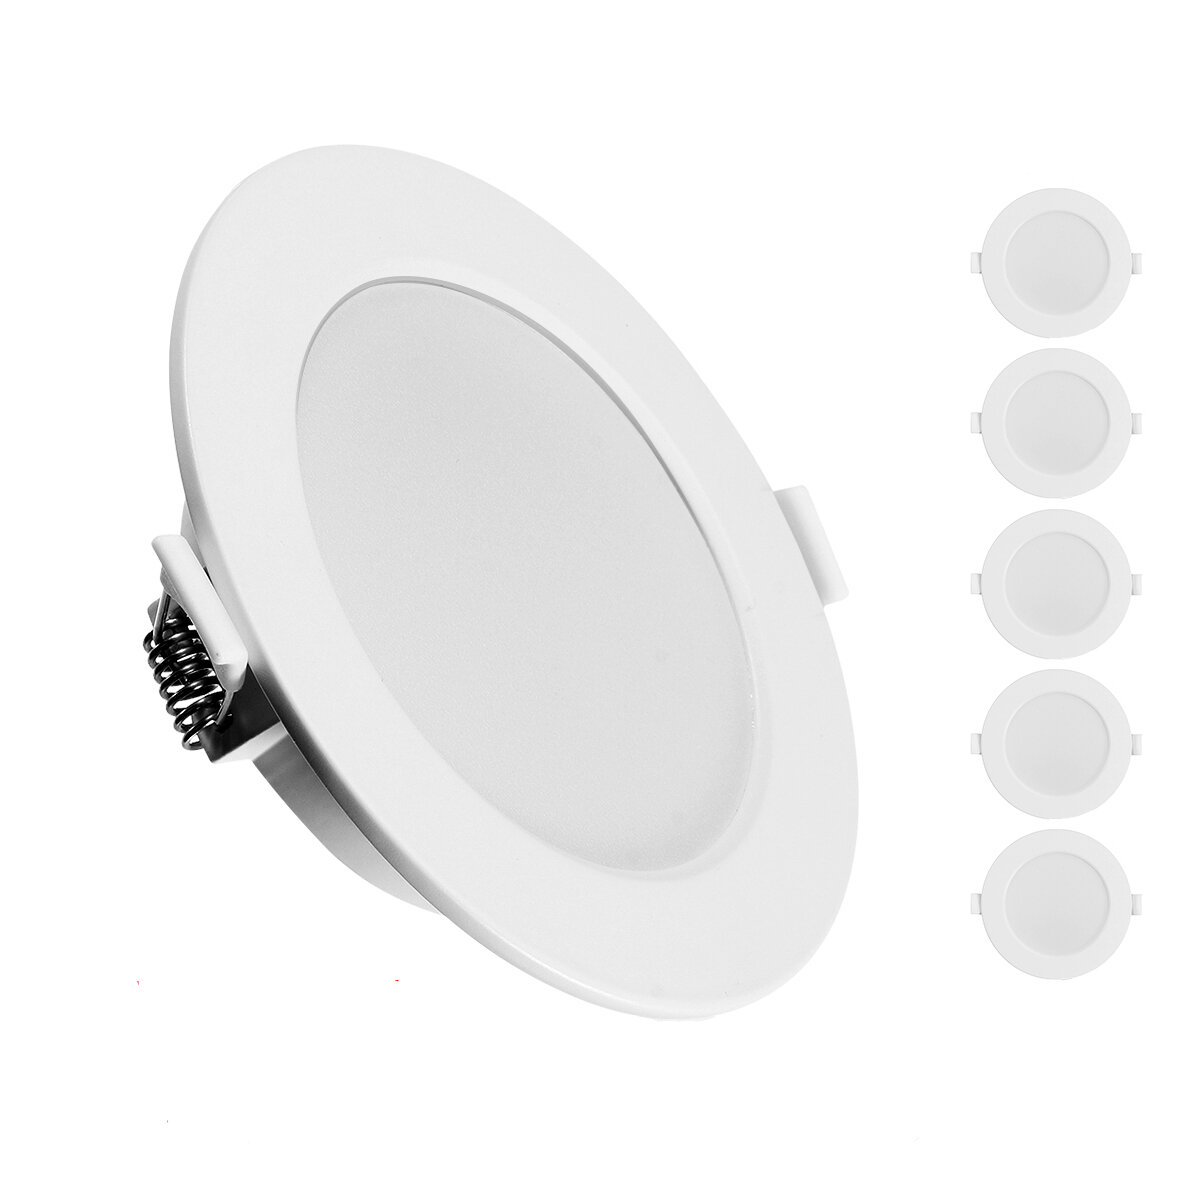 6 x 7w LED IP44 240V Mains Fixed Recessed Ceiling Spotlights Downlight Kitchen 